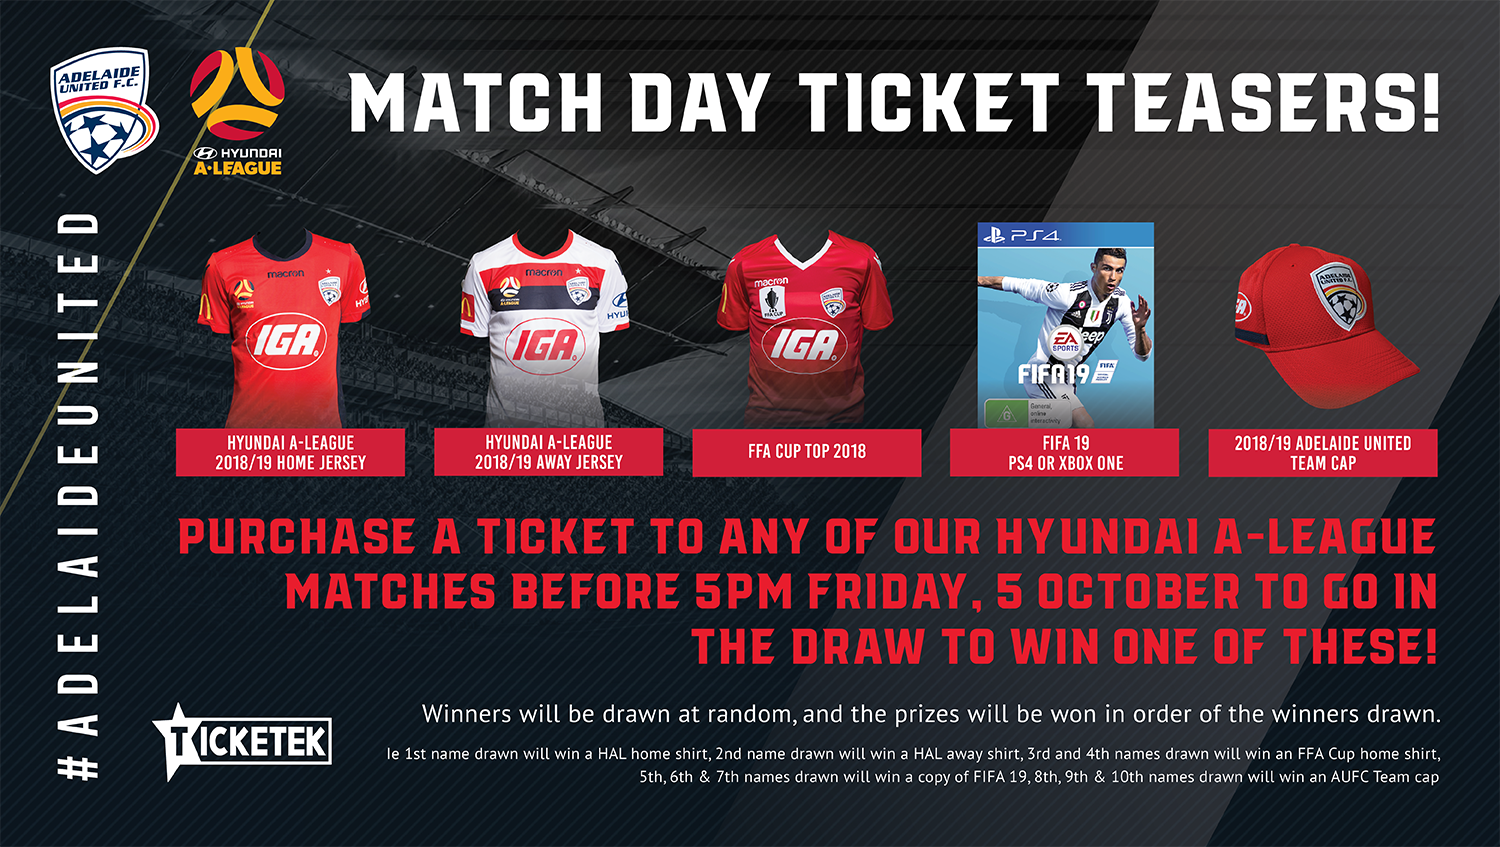 Adelaide United tickets